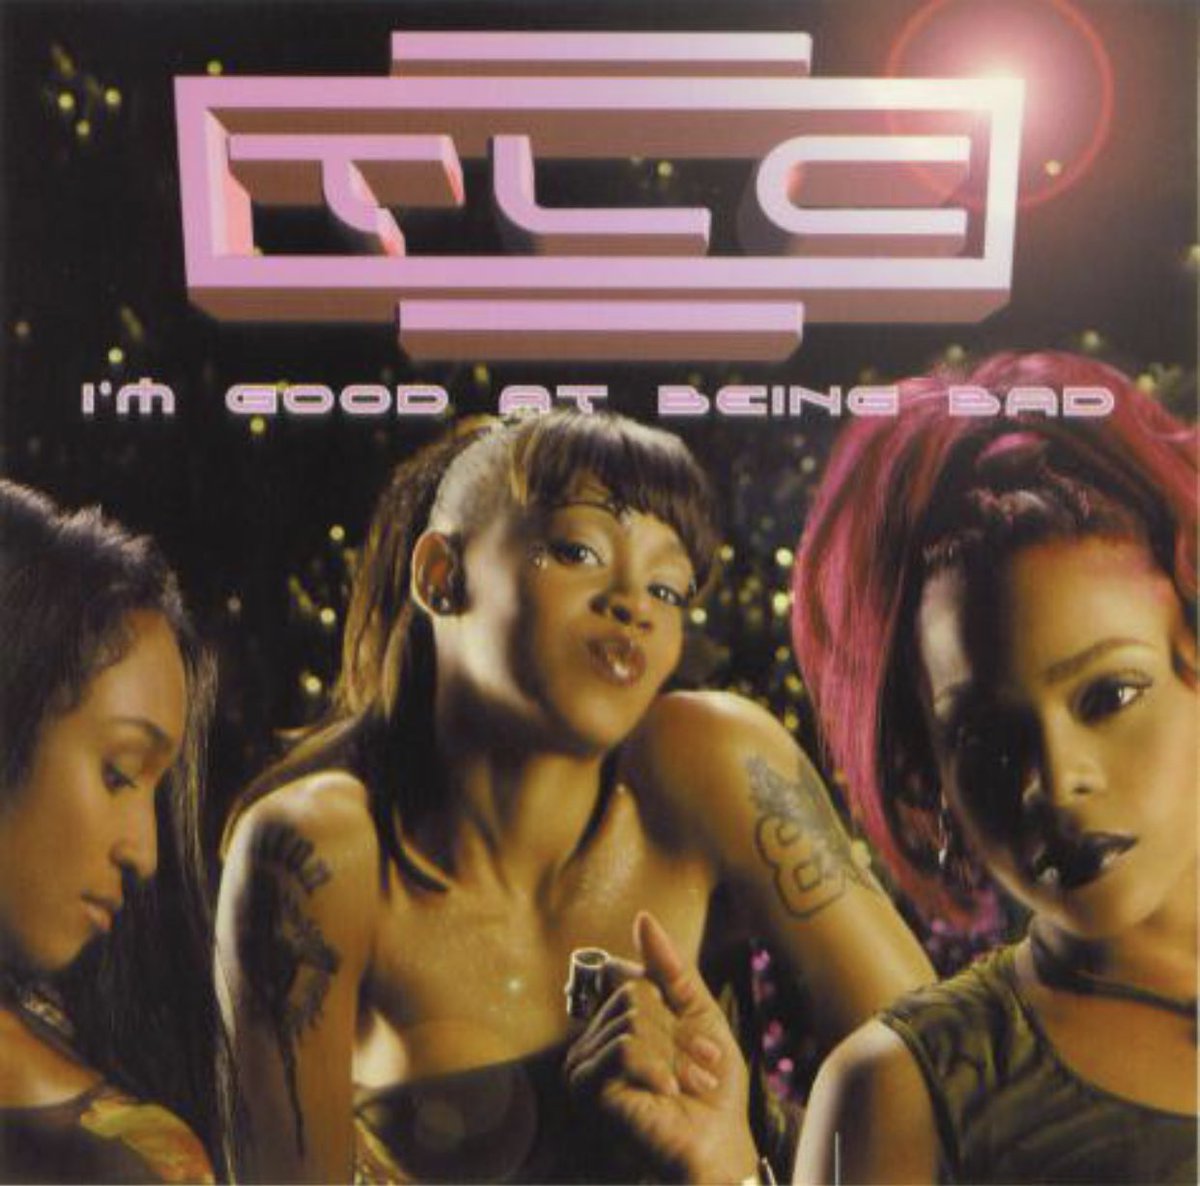 Which girl group had the best R&B song from the ‘99s• Where My Girls At• Bills, Bills, Bills• 808• I’m Good At Being Bad